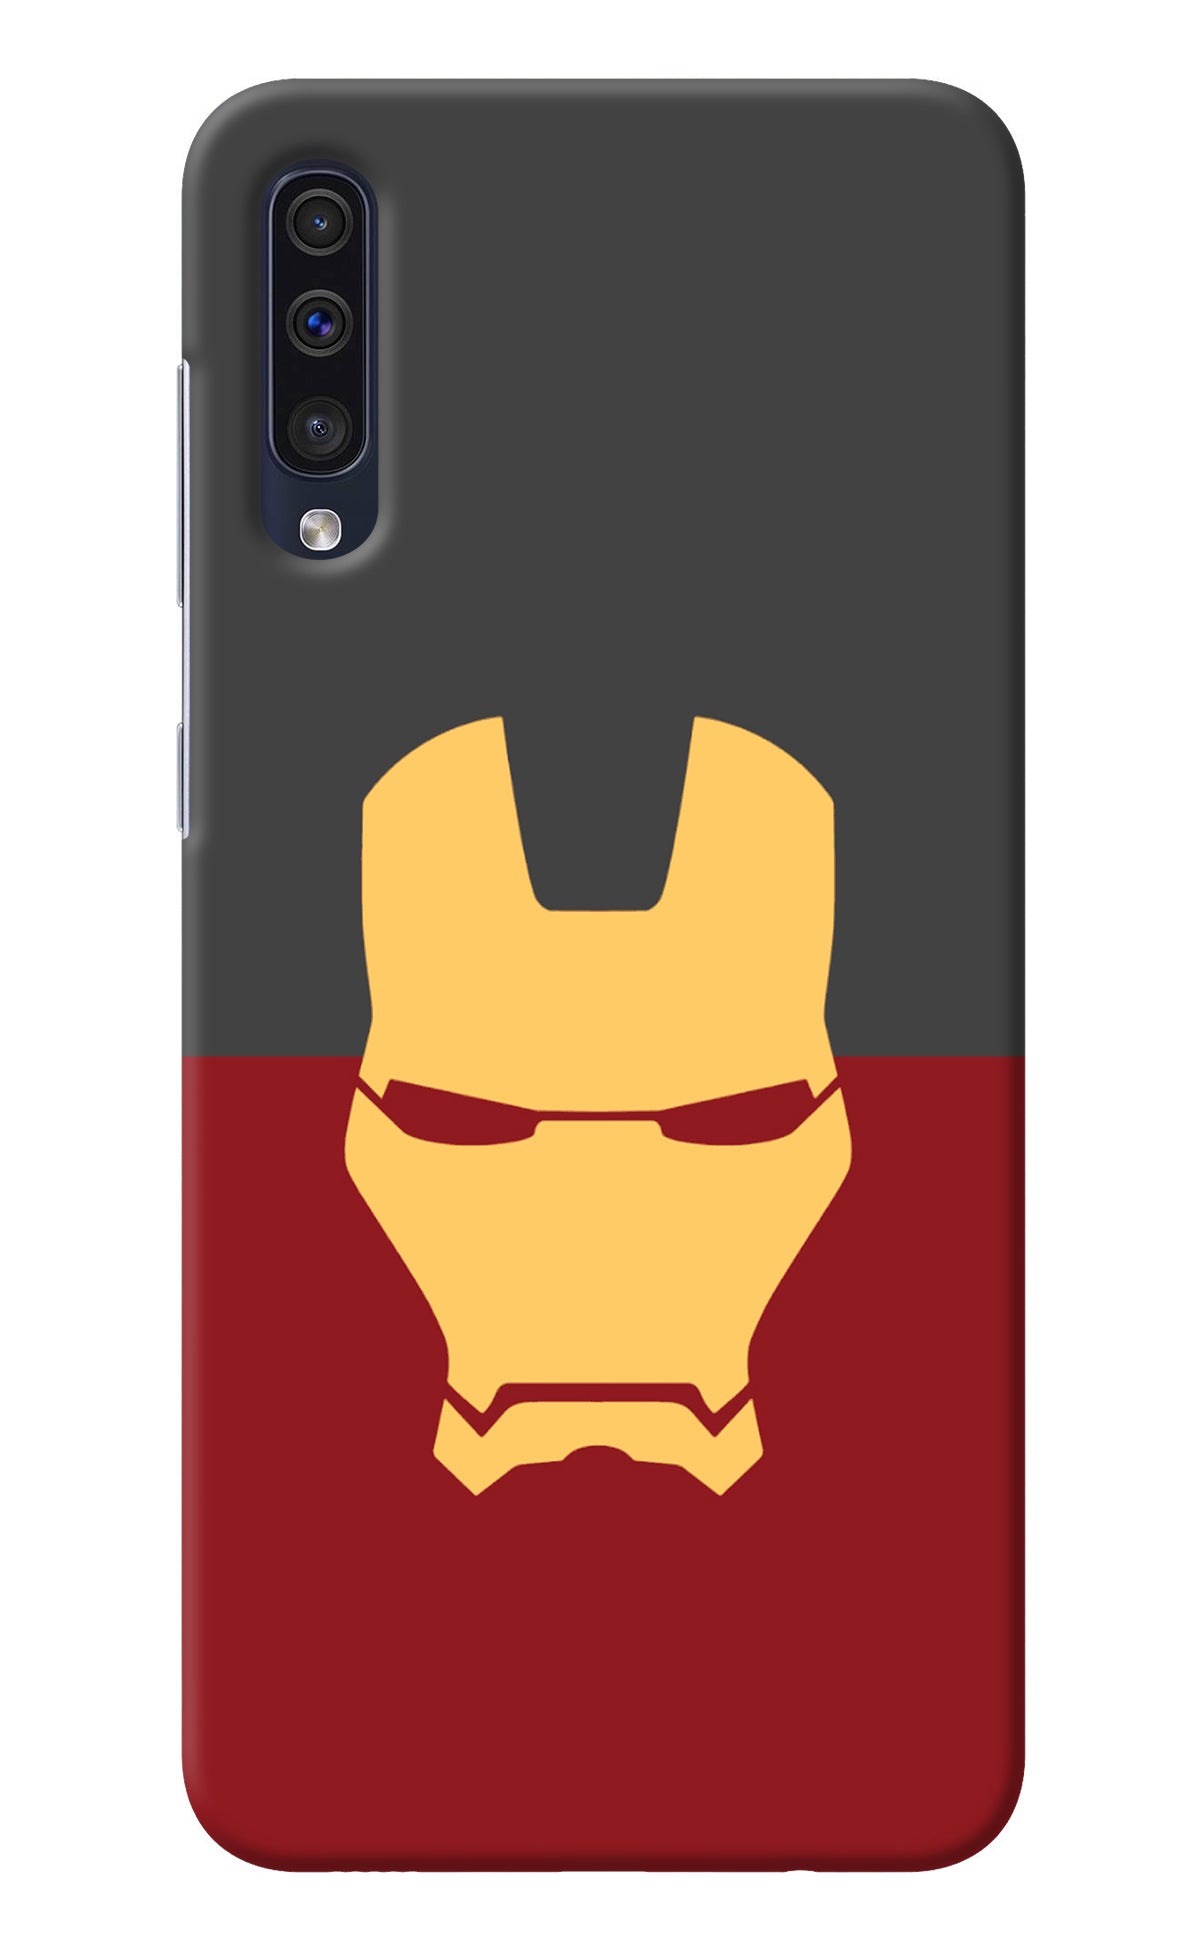 Ironman Samsung A50/A50s/A30s Back Cover